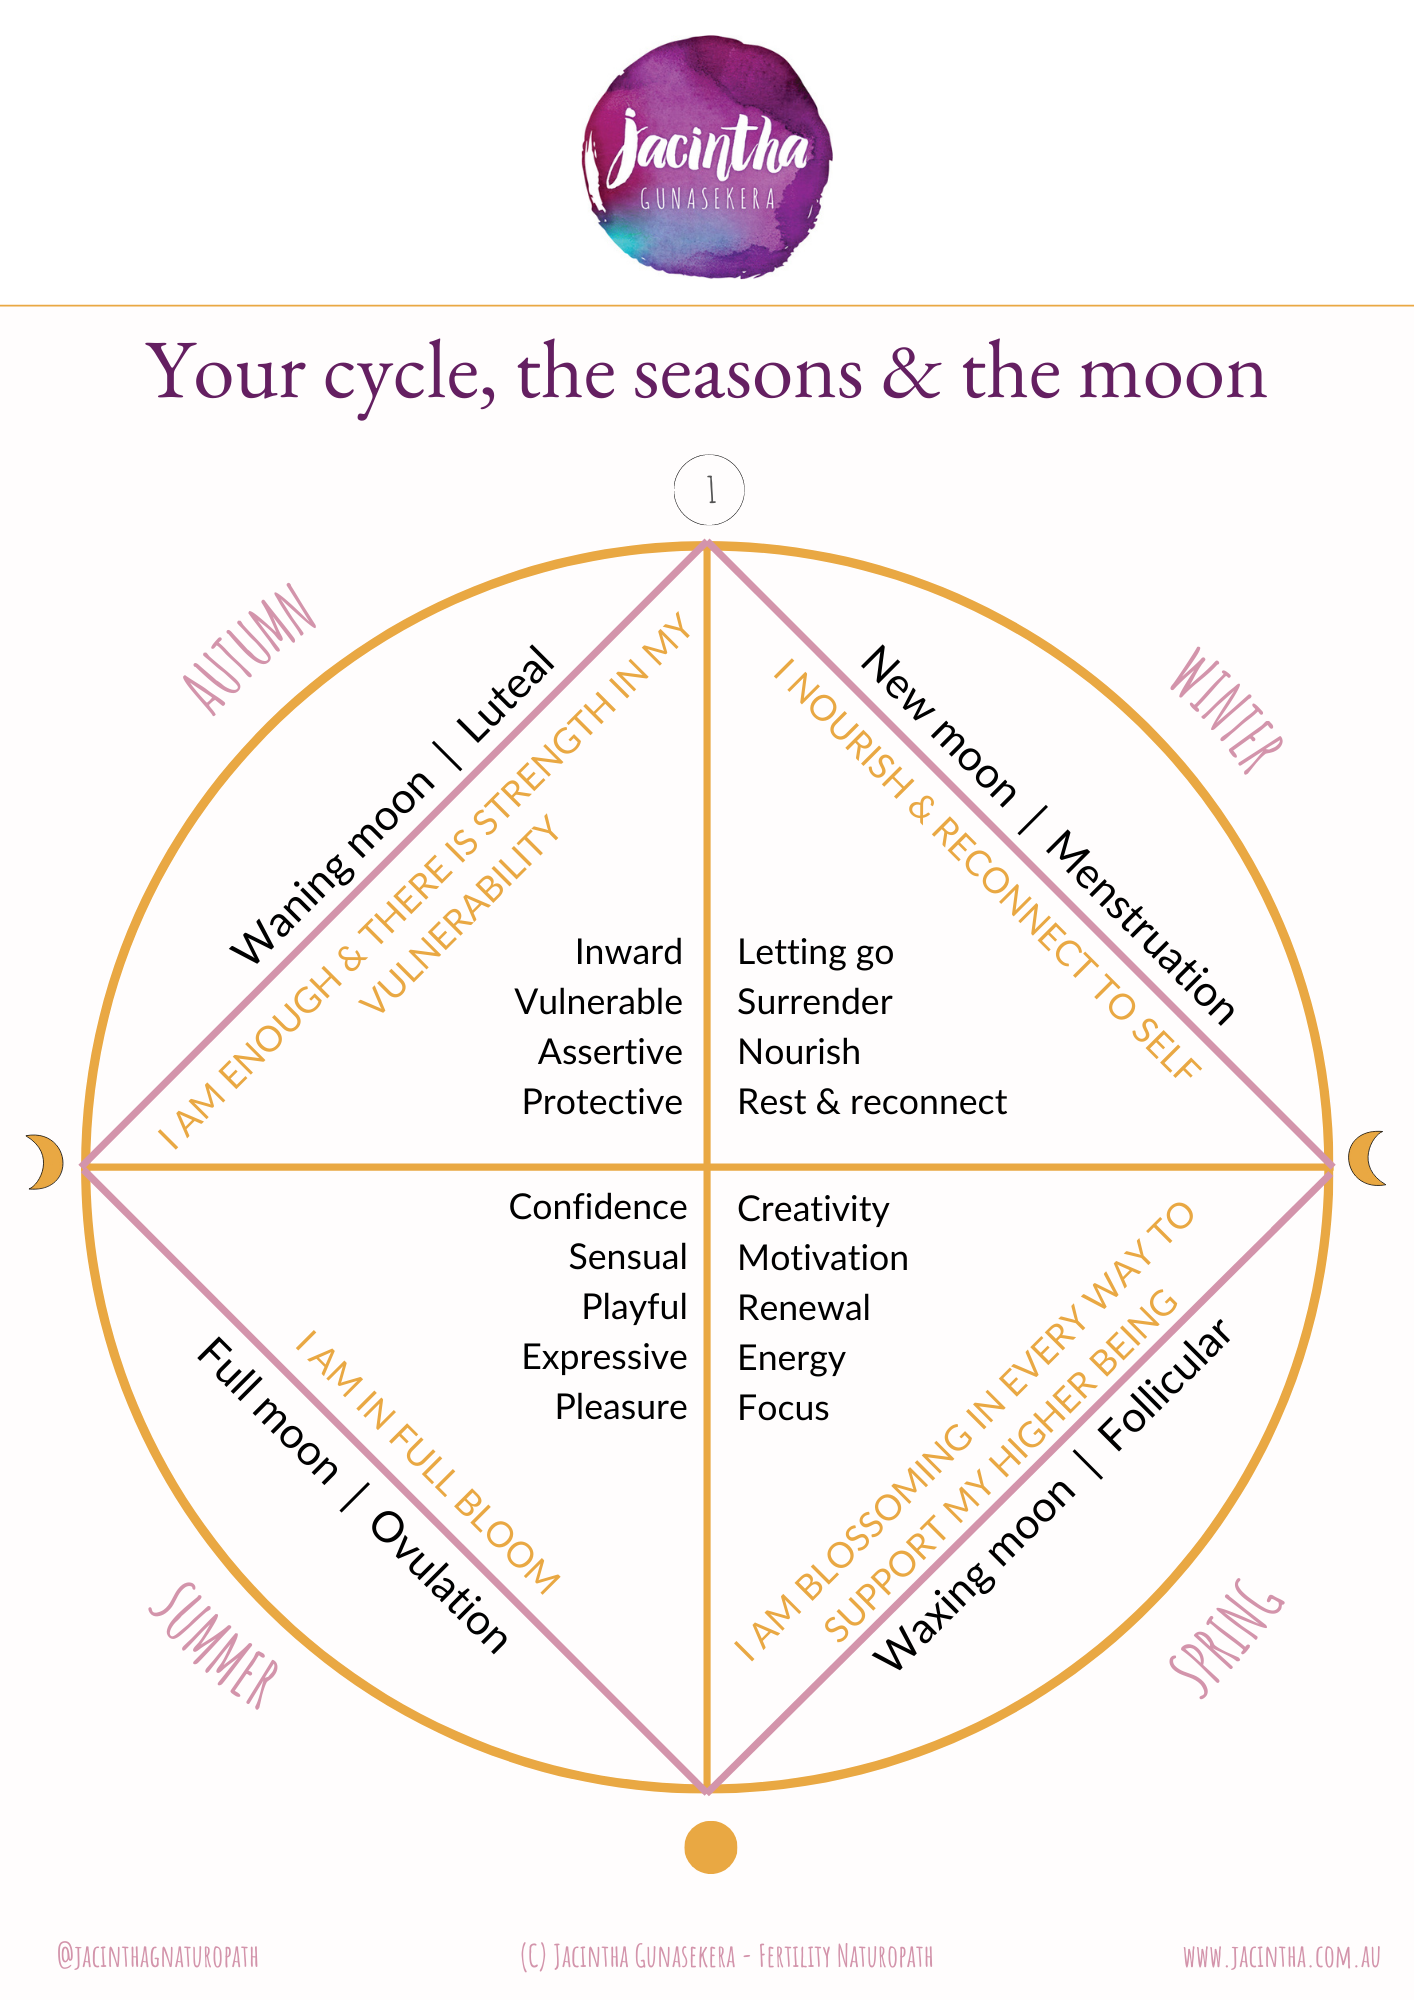 https://www.jacintha.com.au/s/Your-cycle-the-seasons-the-moon.png